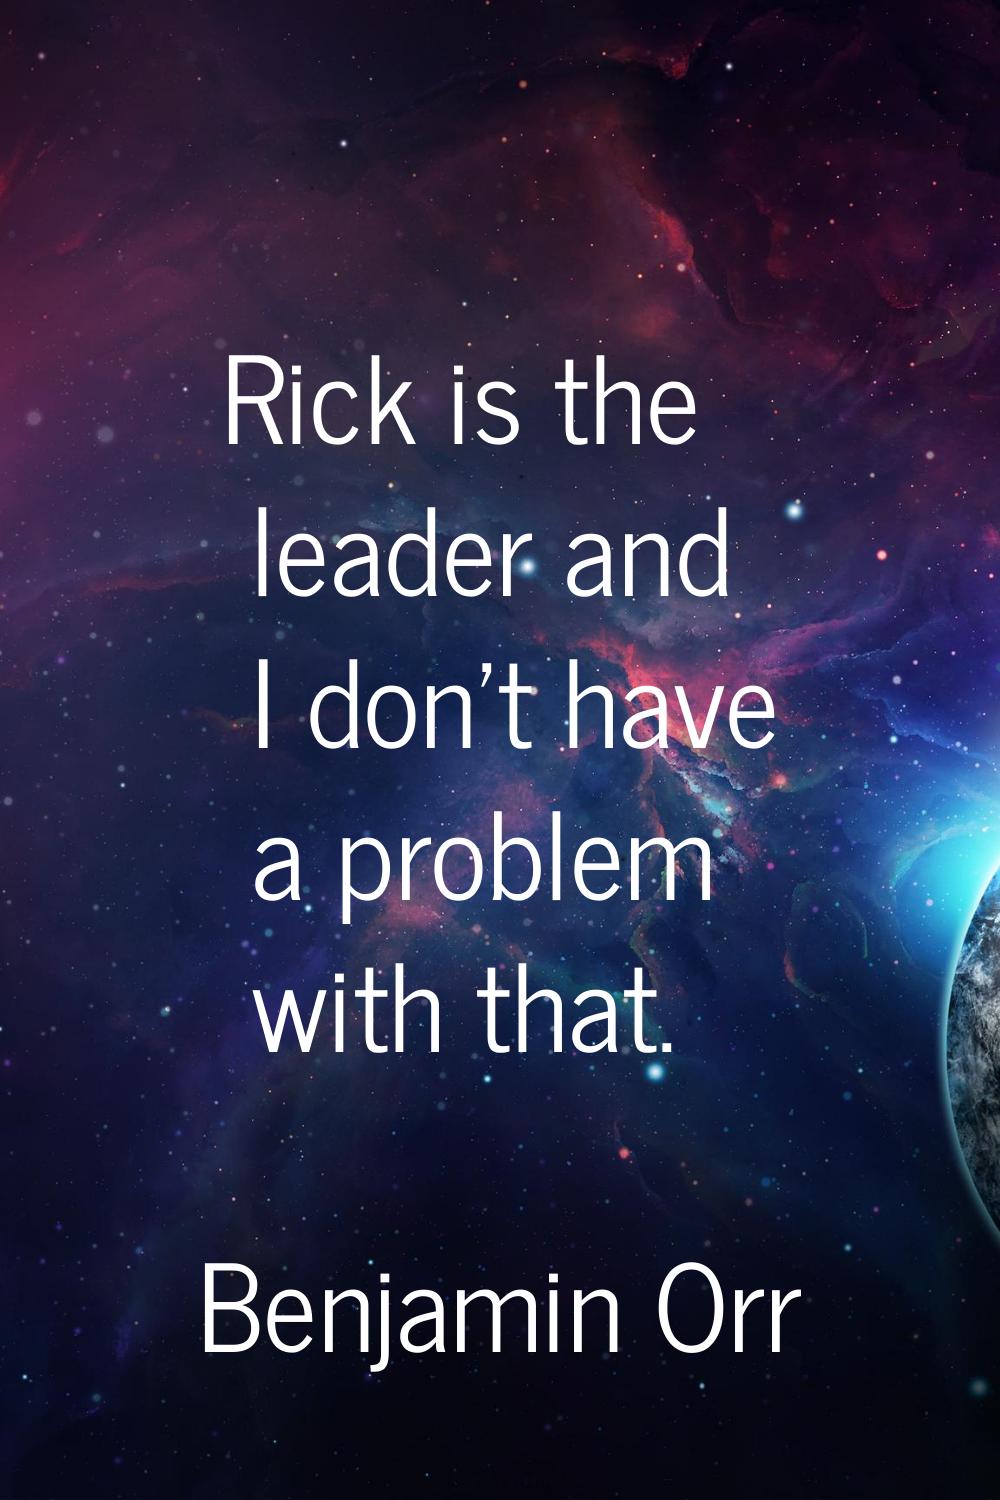 Rick is the leader and I don't have a problem with that.